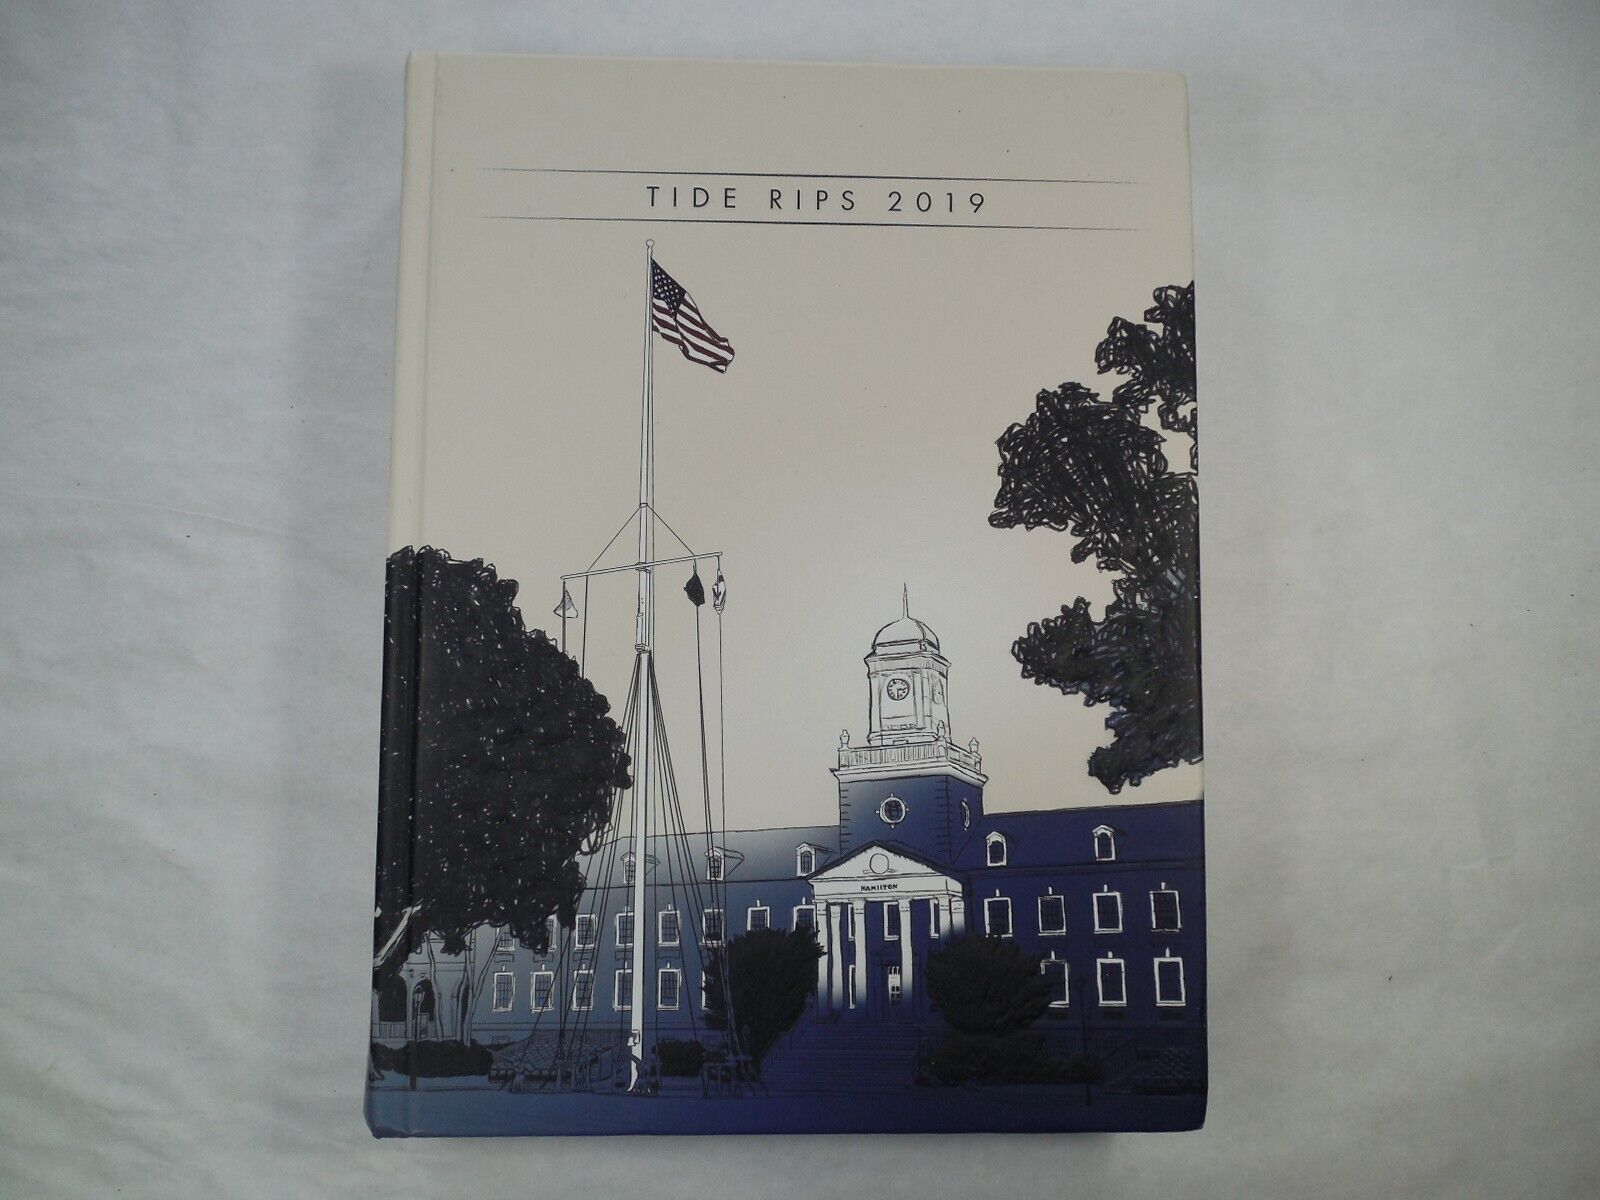 Yearbook, U.S. Coast Guard Academy, 2019, Tide Rips, UNMARKED, Very Good++